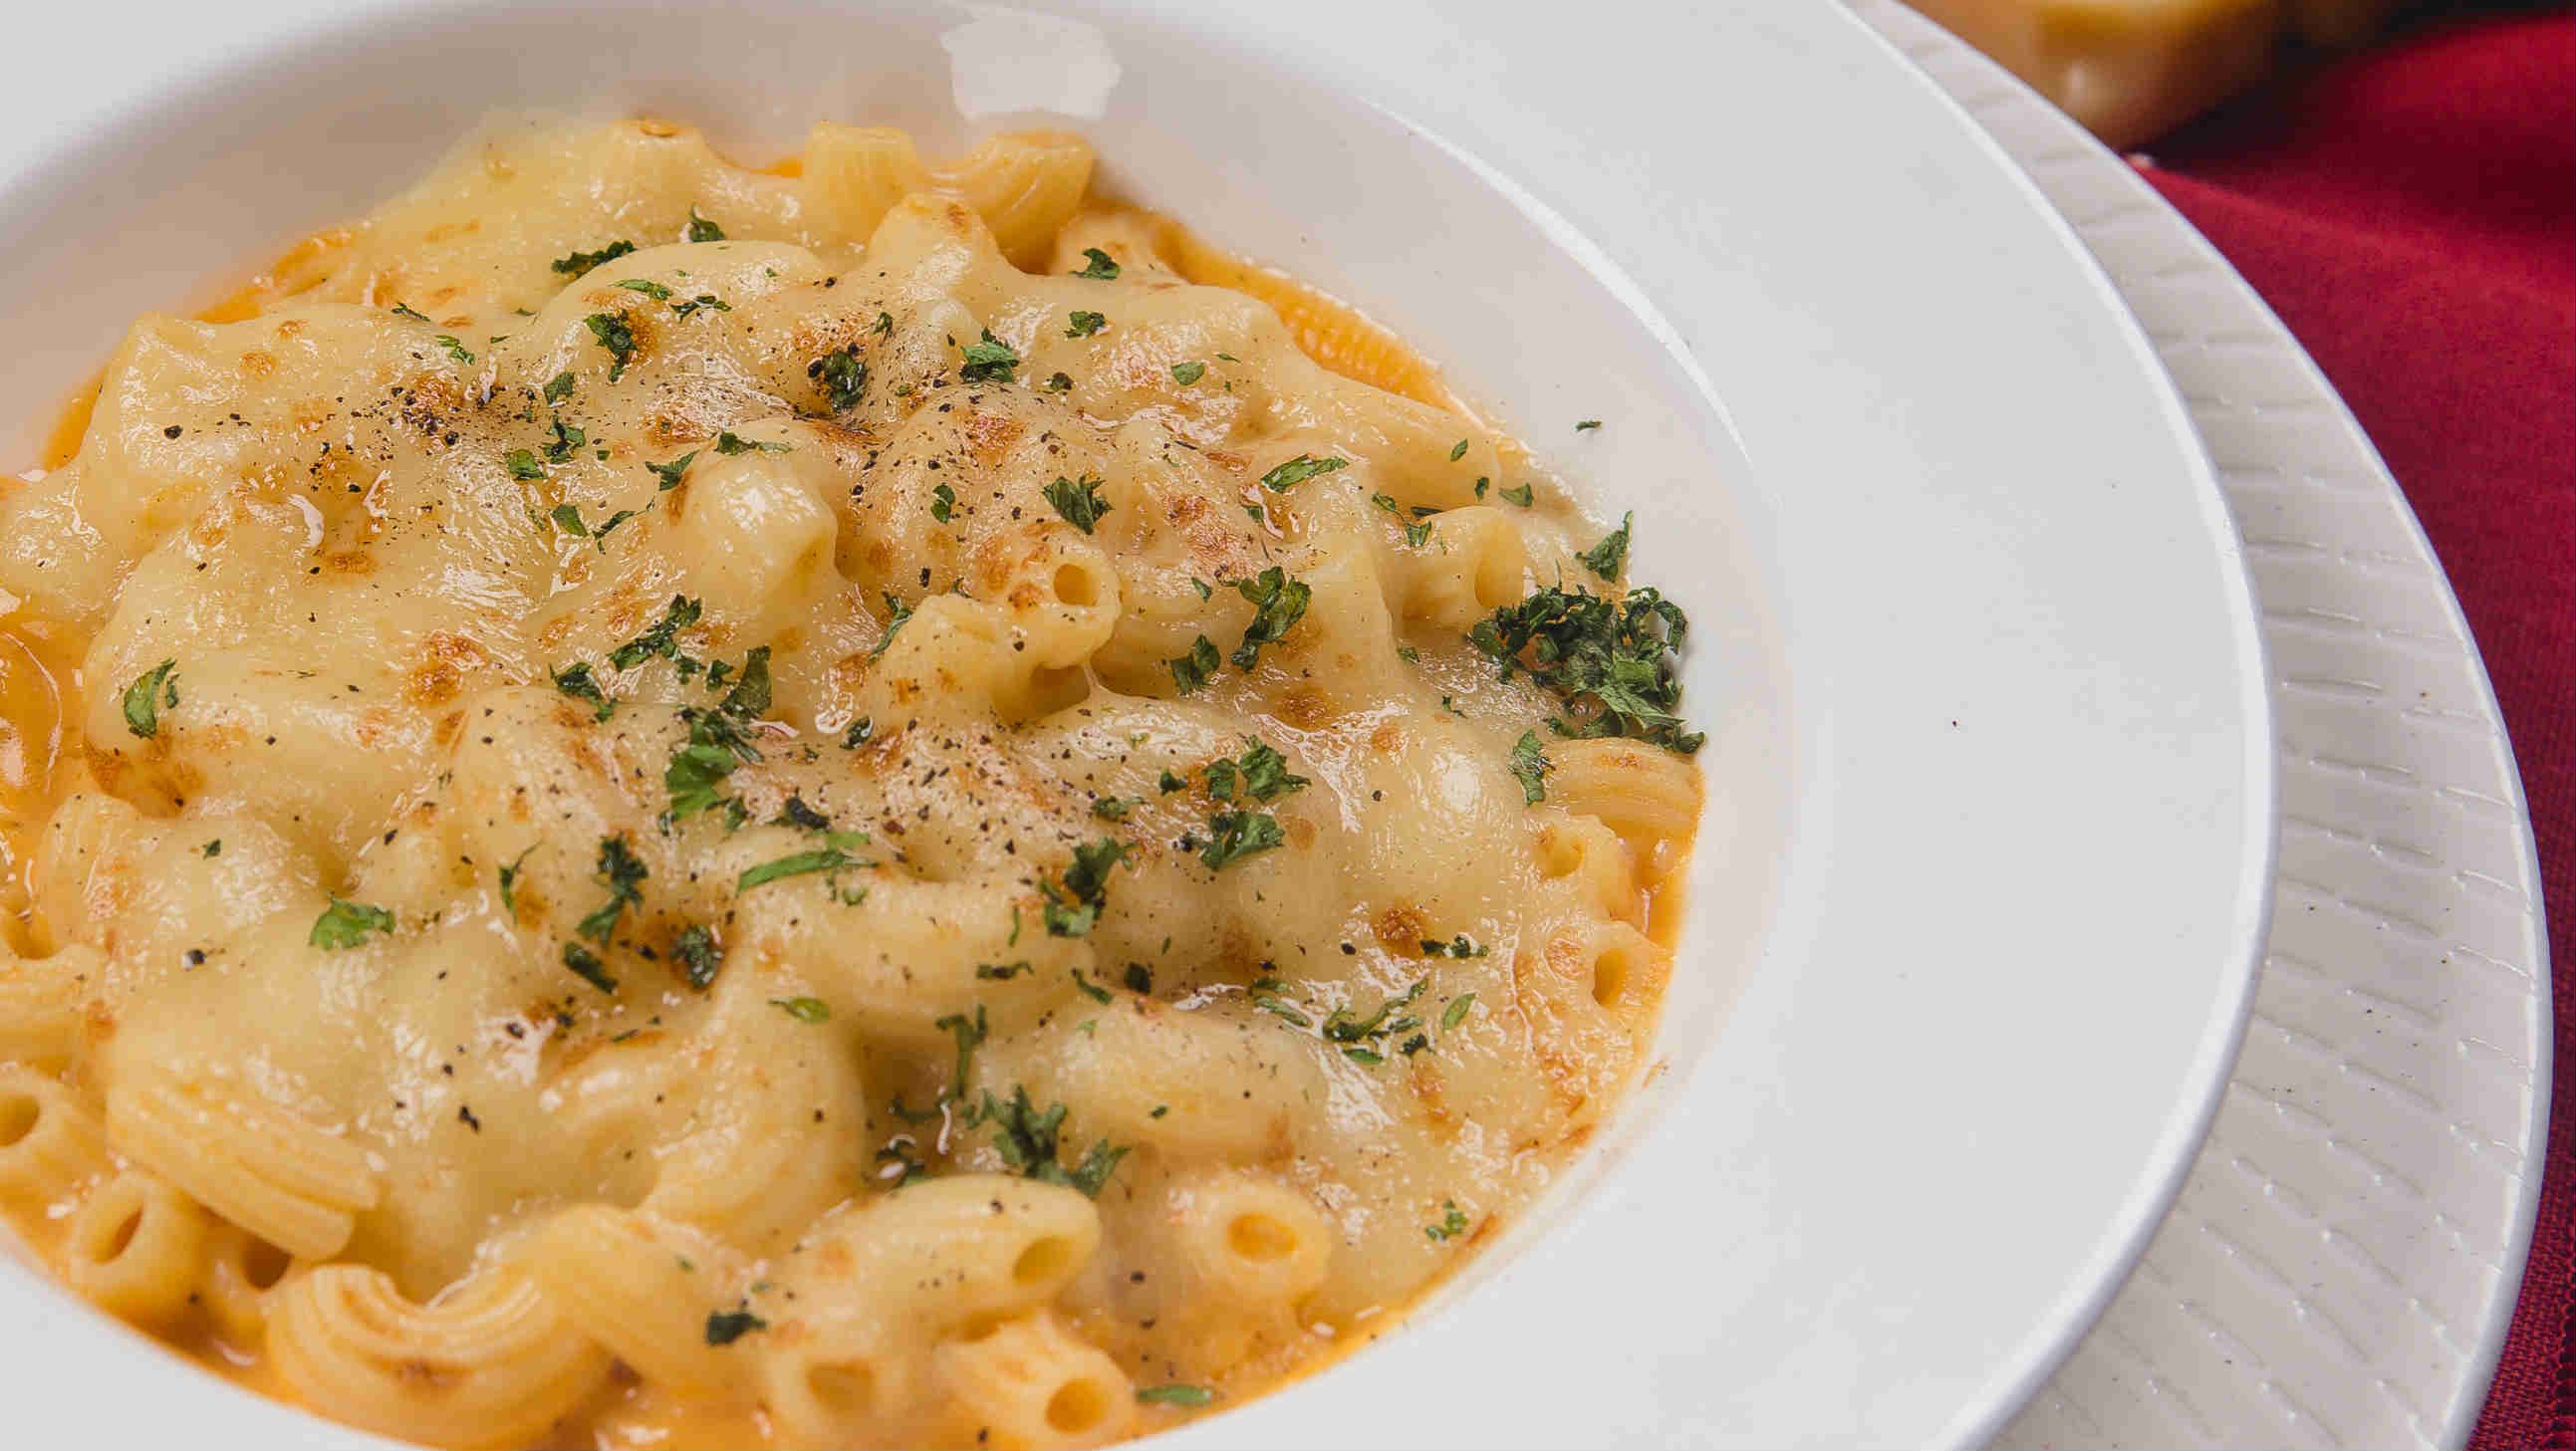 TRUFFLE MAC 'N CHEESE. Macaroni cooked in a 3-cheese sauce and infused with white truffle oil. Take a bite for P280
  